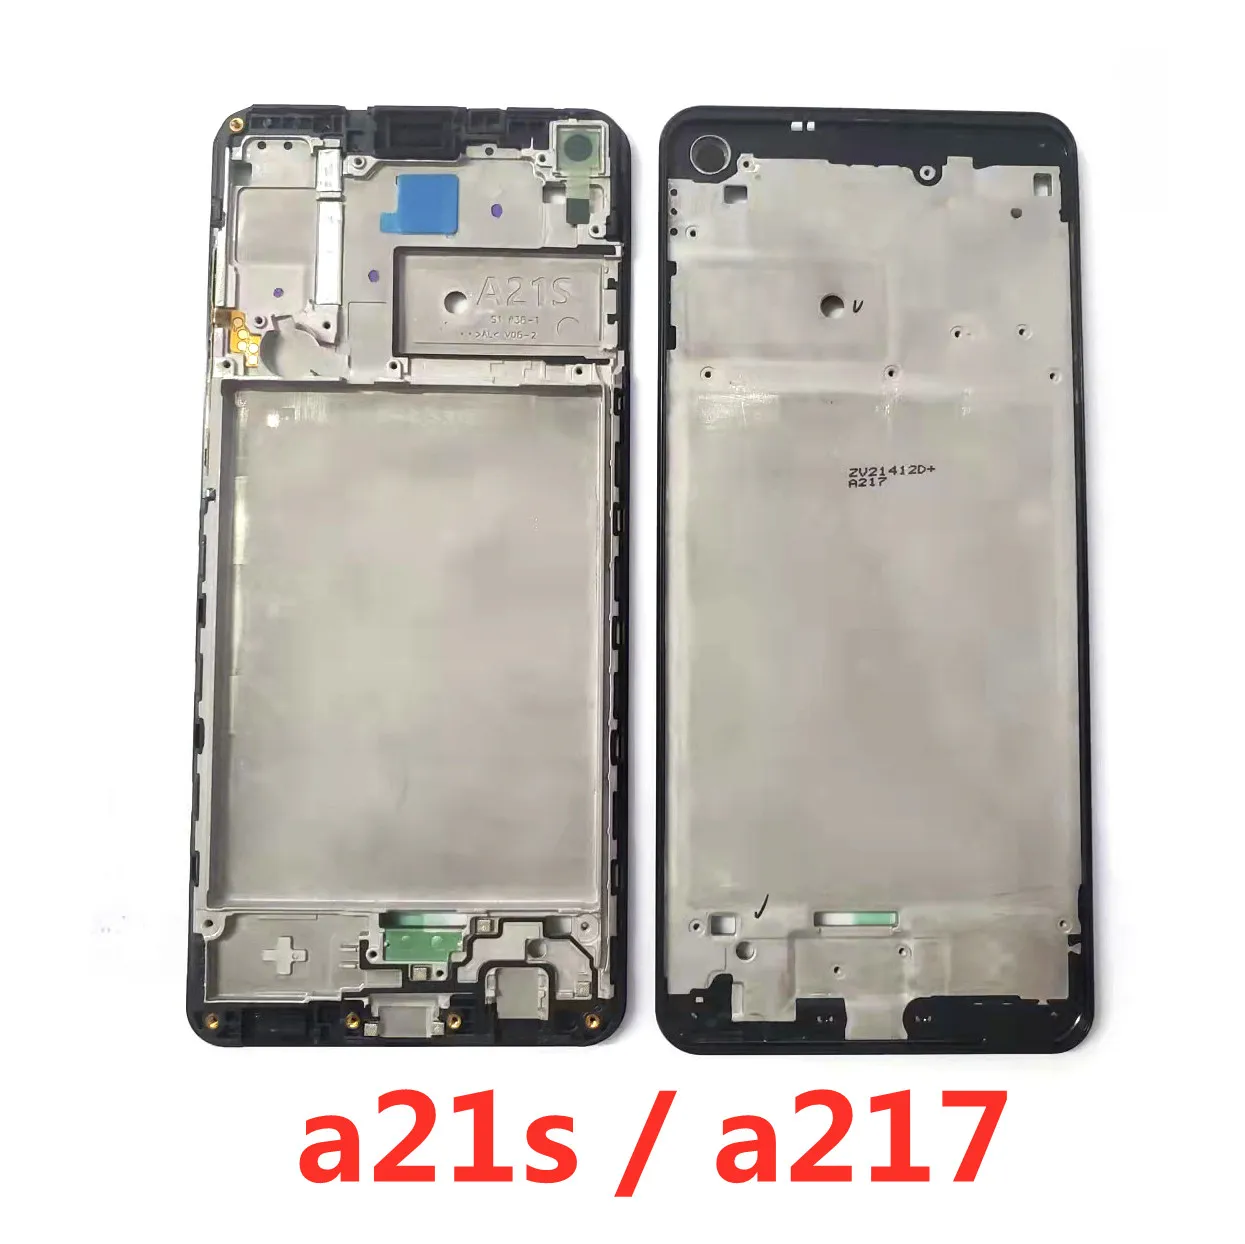 

Original New Phone LCD Screen Plate Bezel For Samsung Galaxy A21s A217 Housing Middle Frame Chassis Front Lid Panel Repair Part